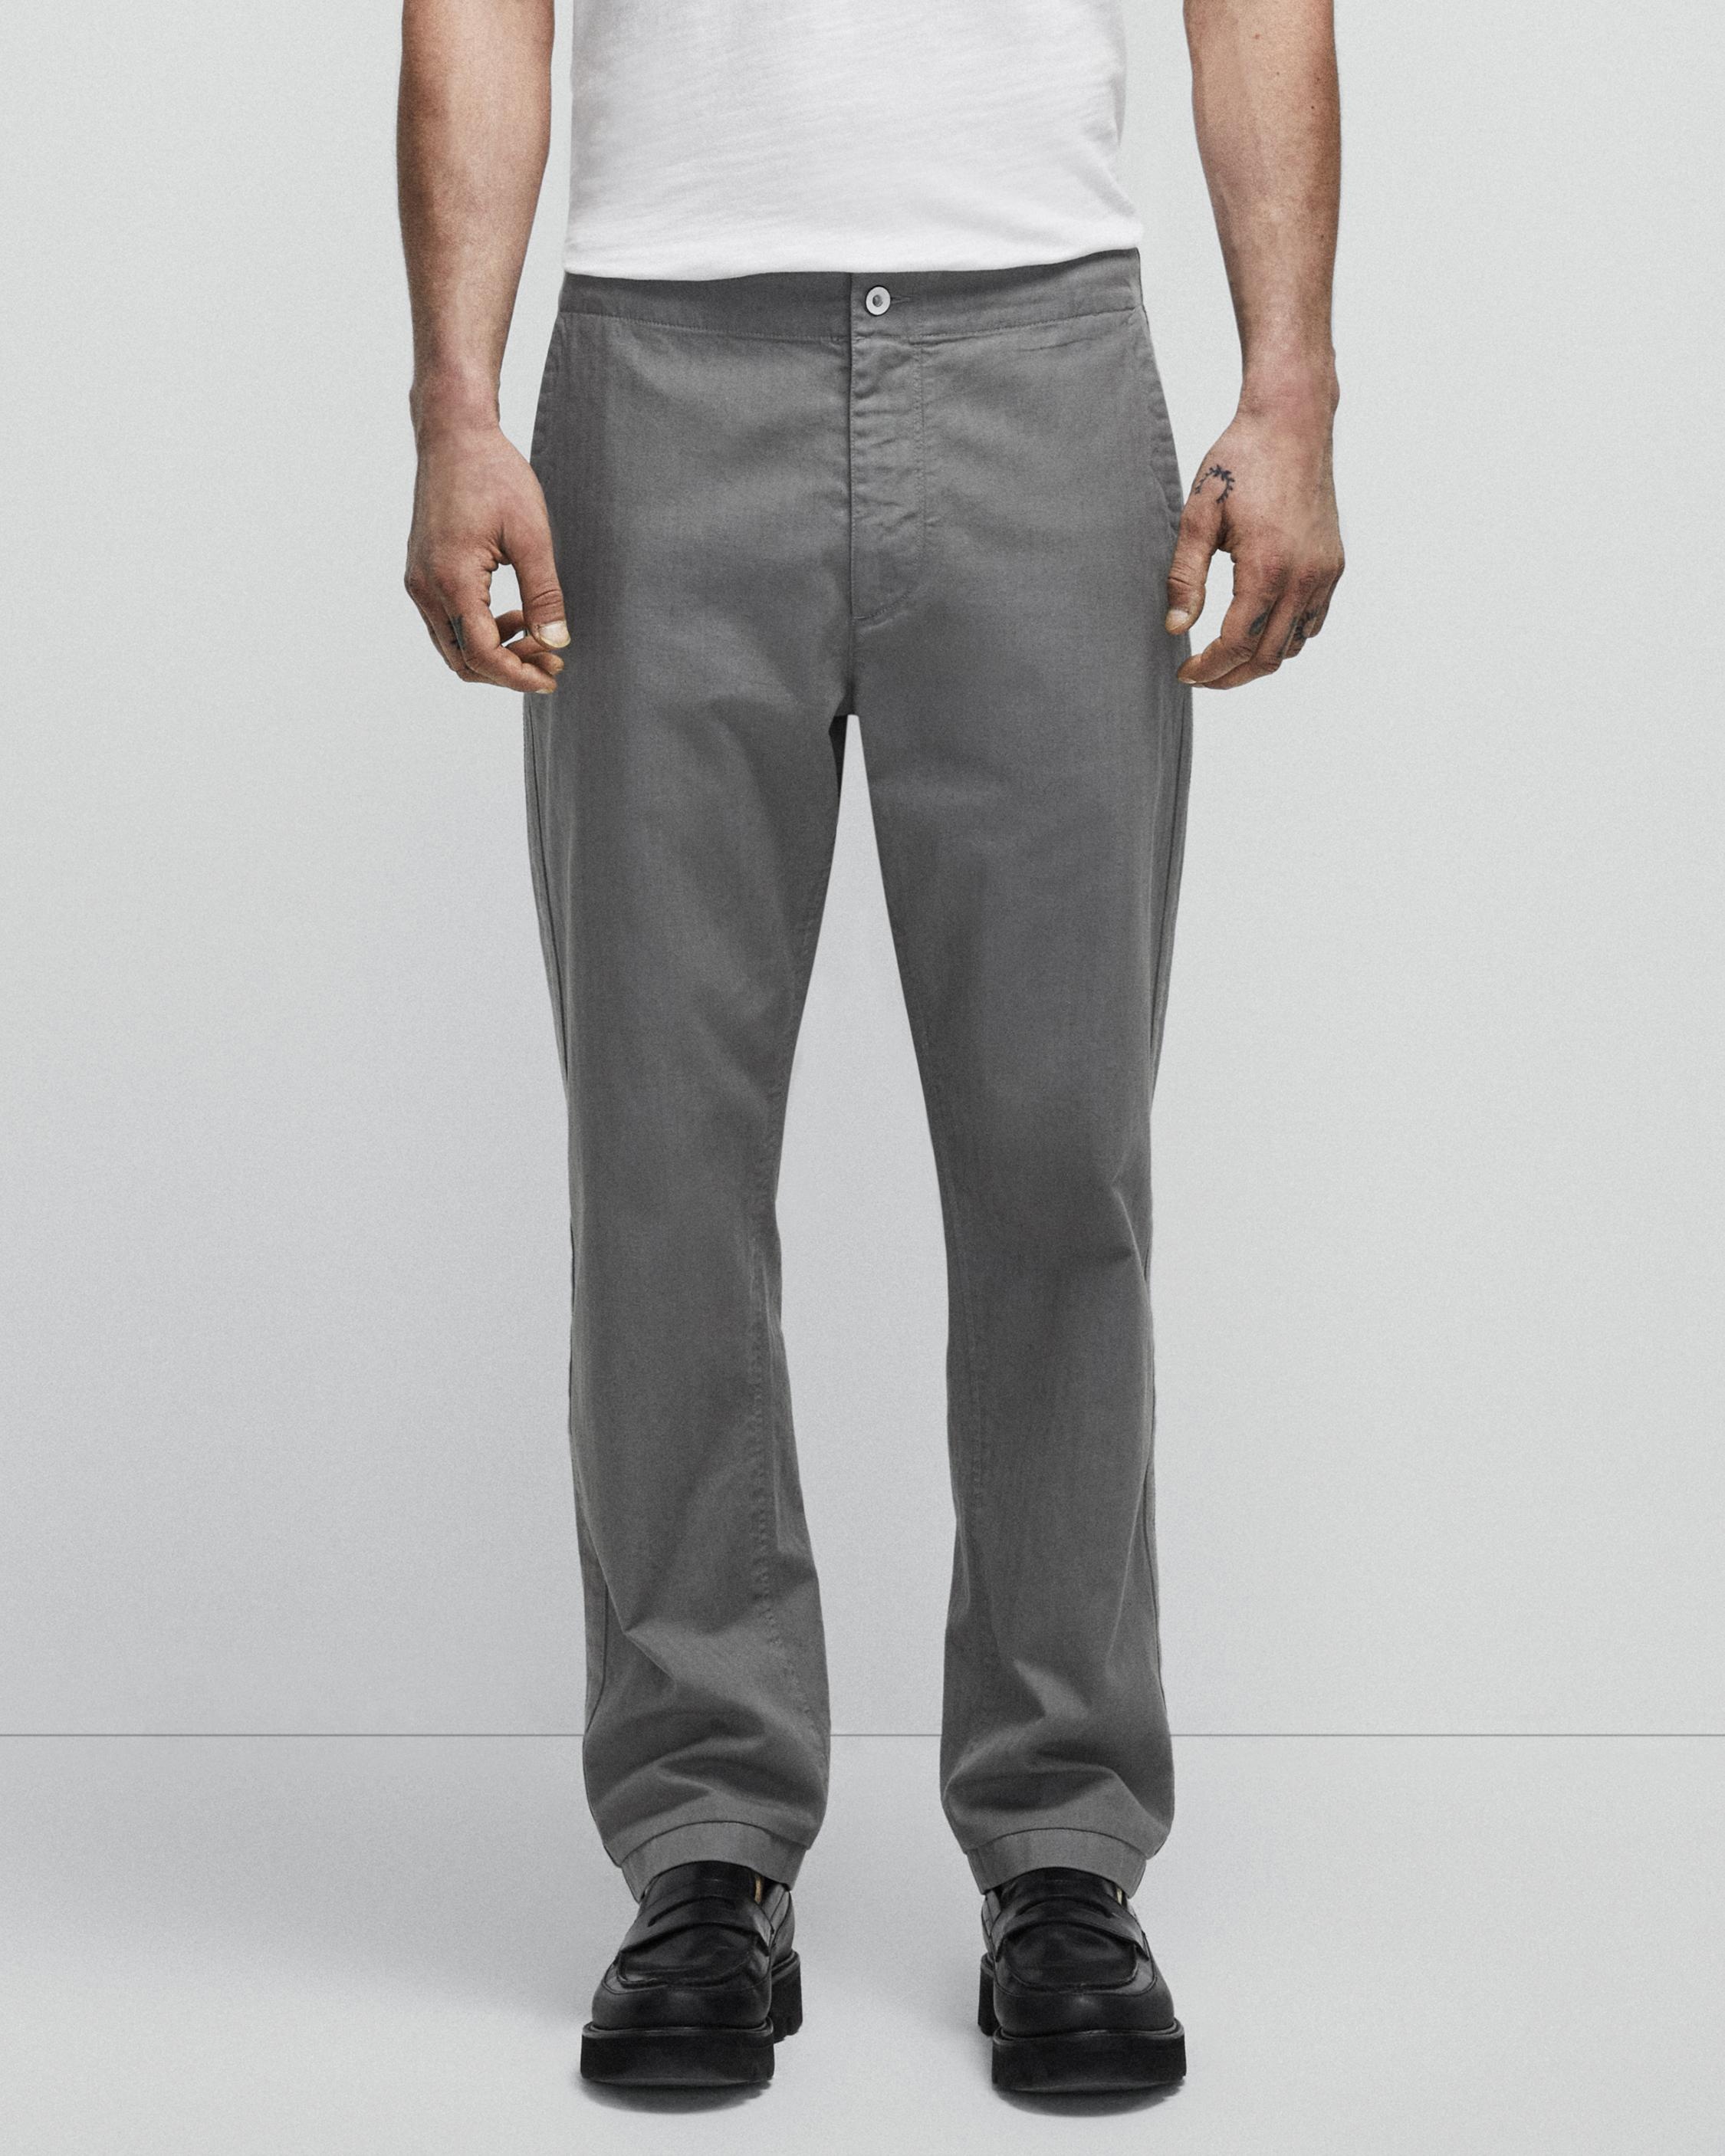 Brighton Cotton Linen Trouser
Relaxed Fit Pant - 4